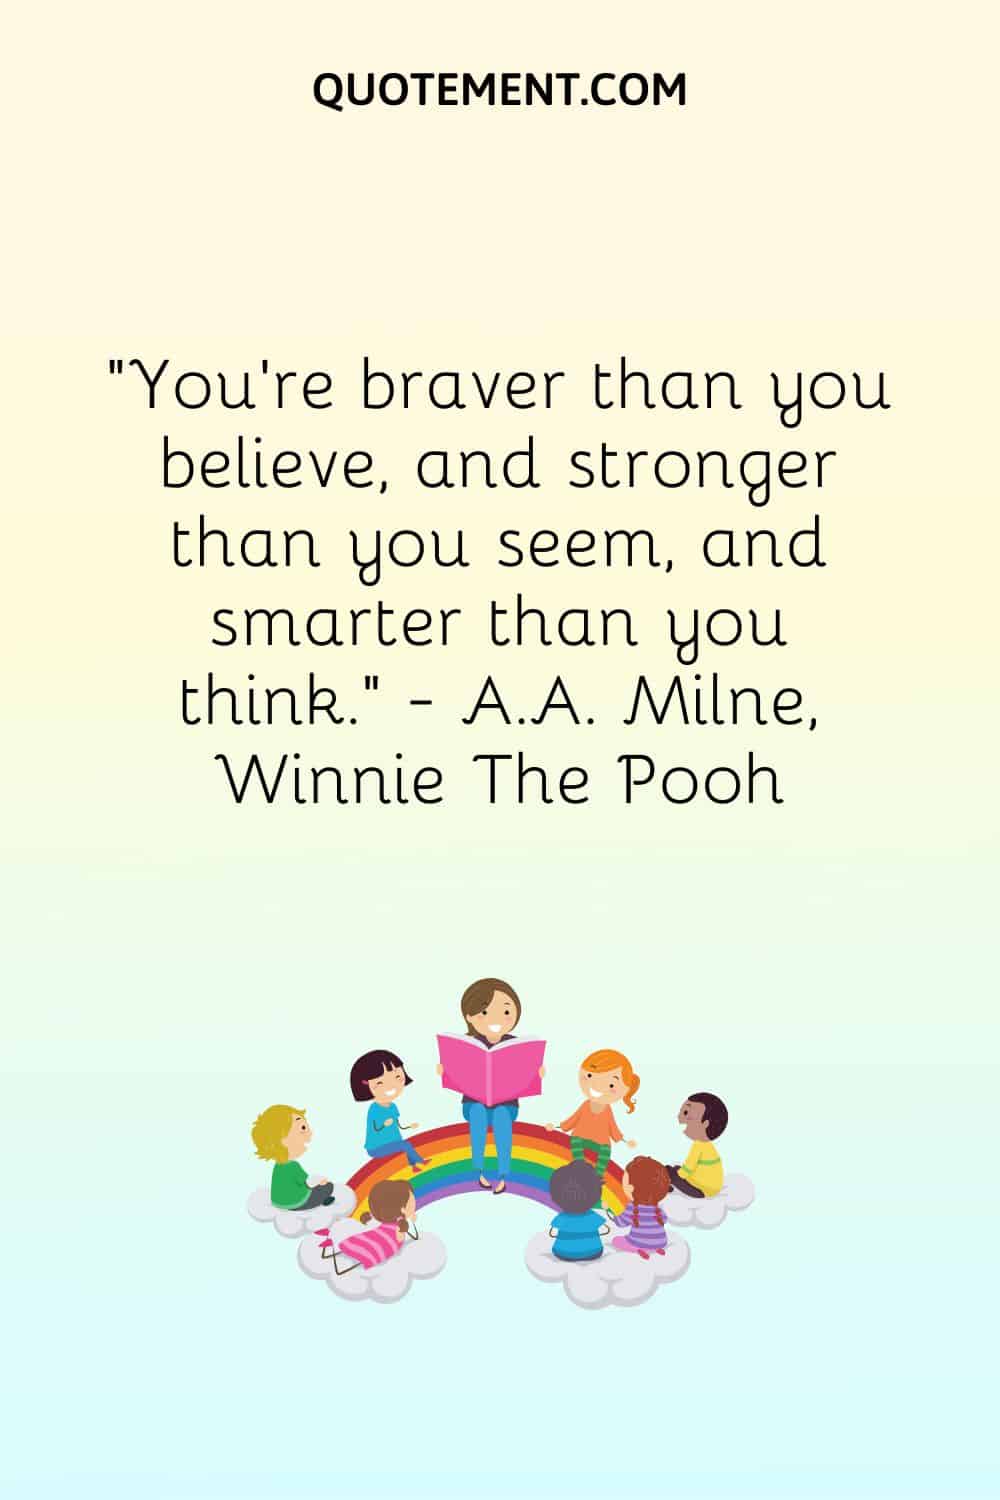 You're braver than you believe, and stronger than you seem, and smarter than you think